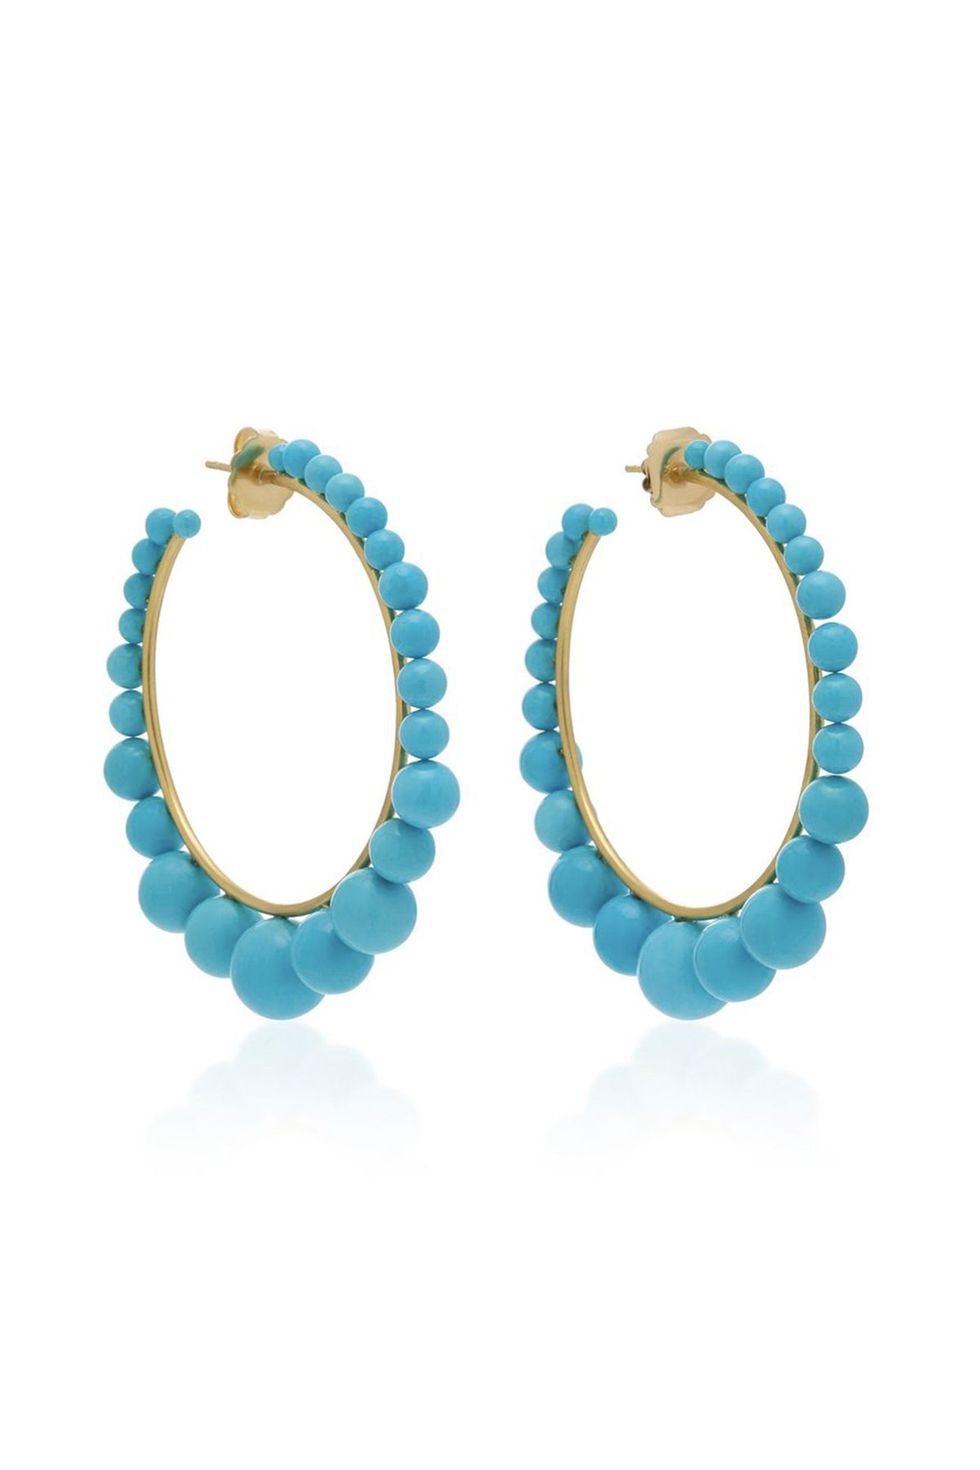 18K Gold And Turquoise Hoop Earrings